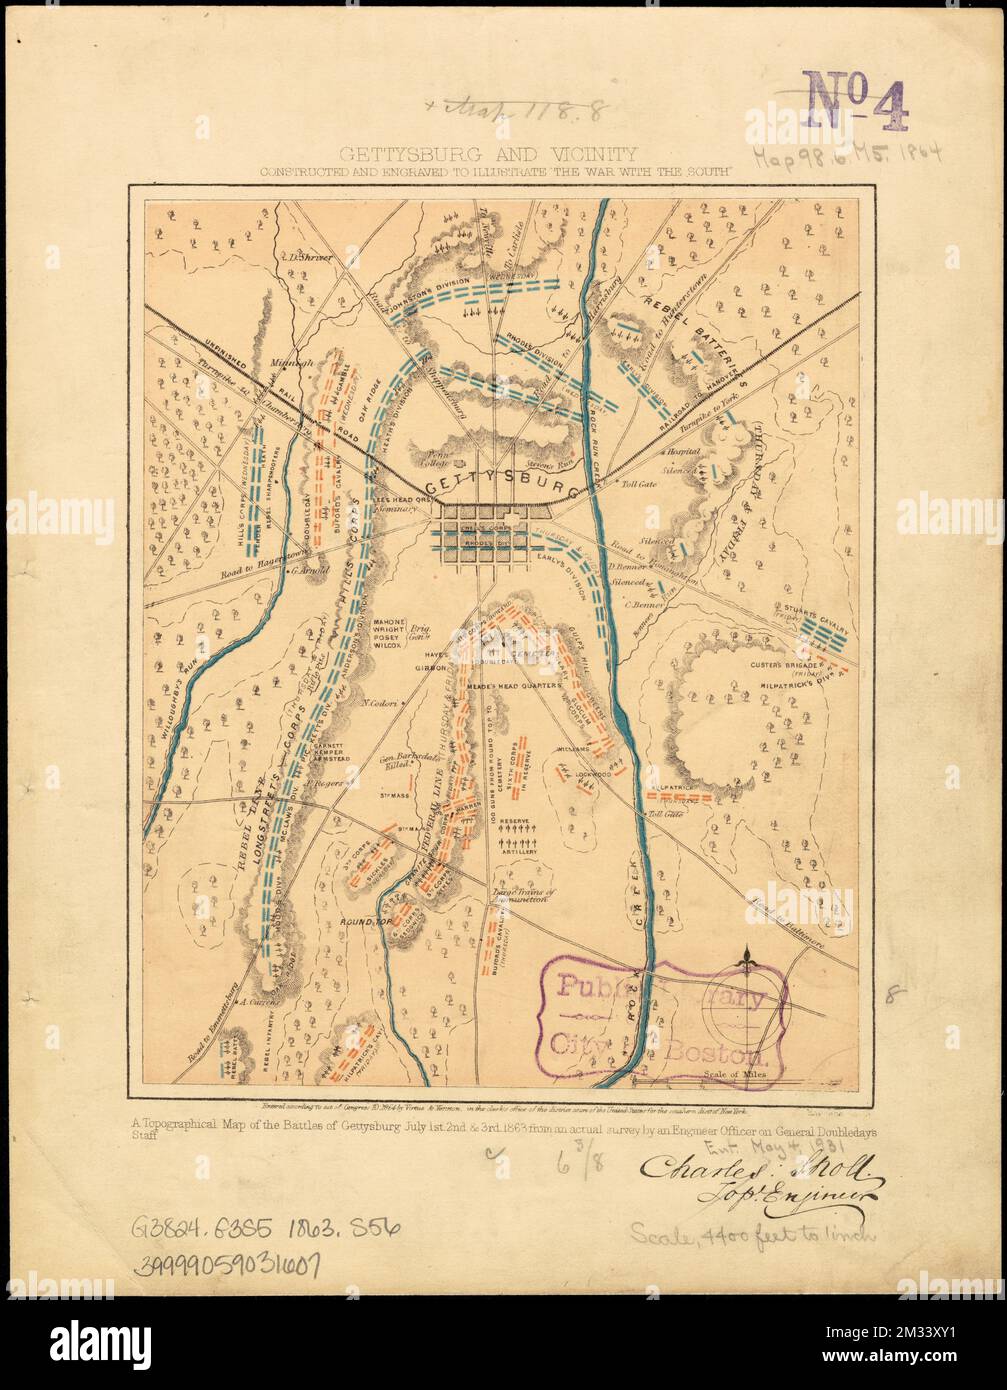 Gettysburg And Vicinity Constructed And Engraved To Illustrate The